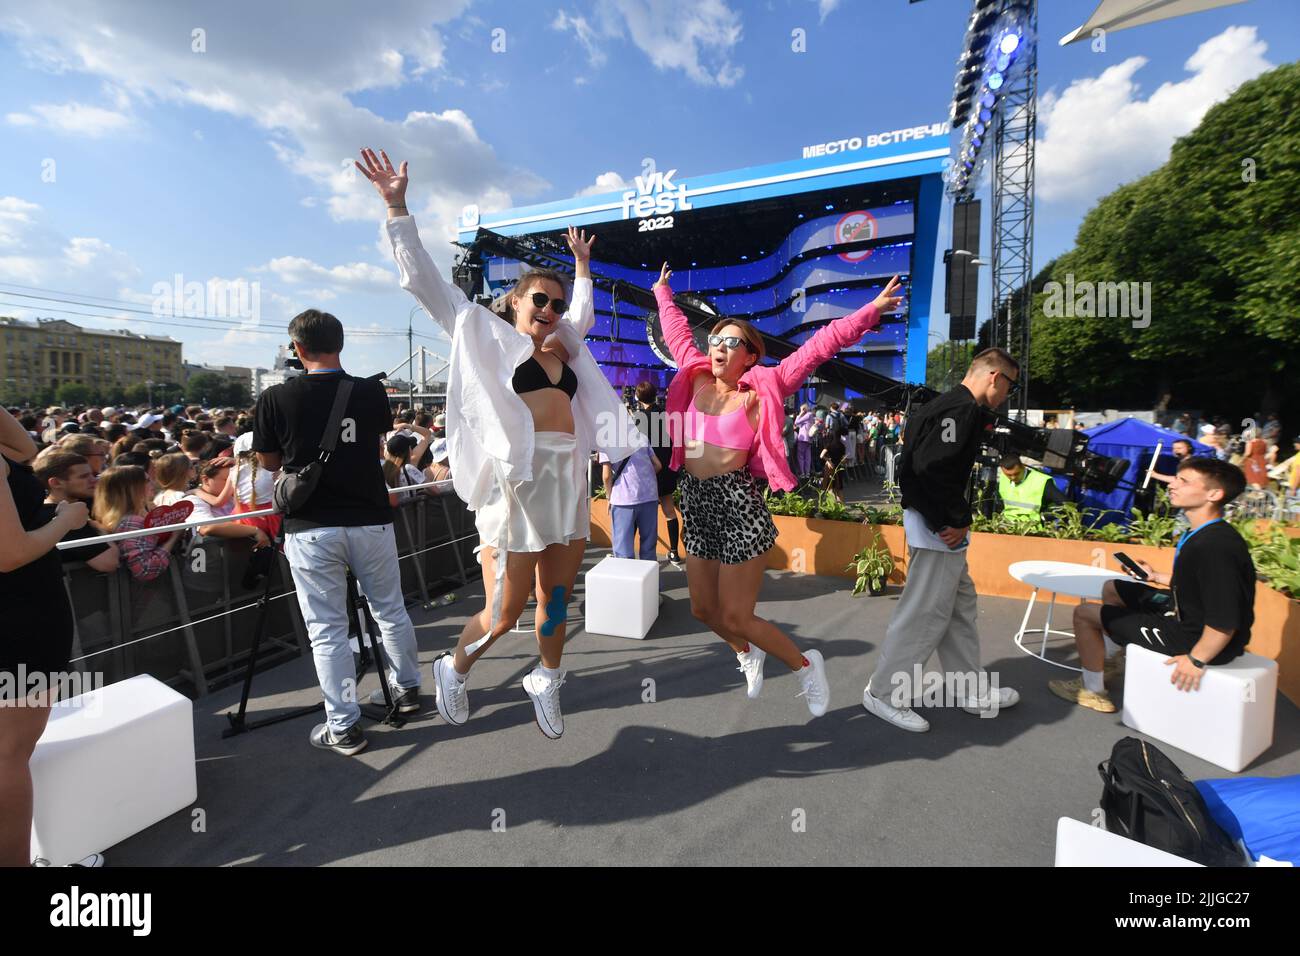 Moscow. At the musical VK Fest festival in Park Stock Photo Alamy